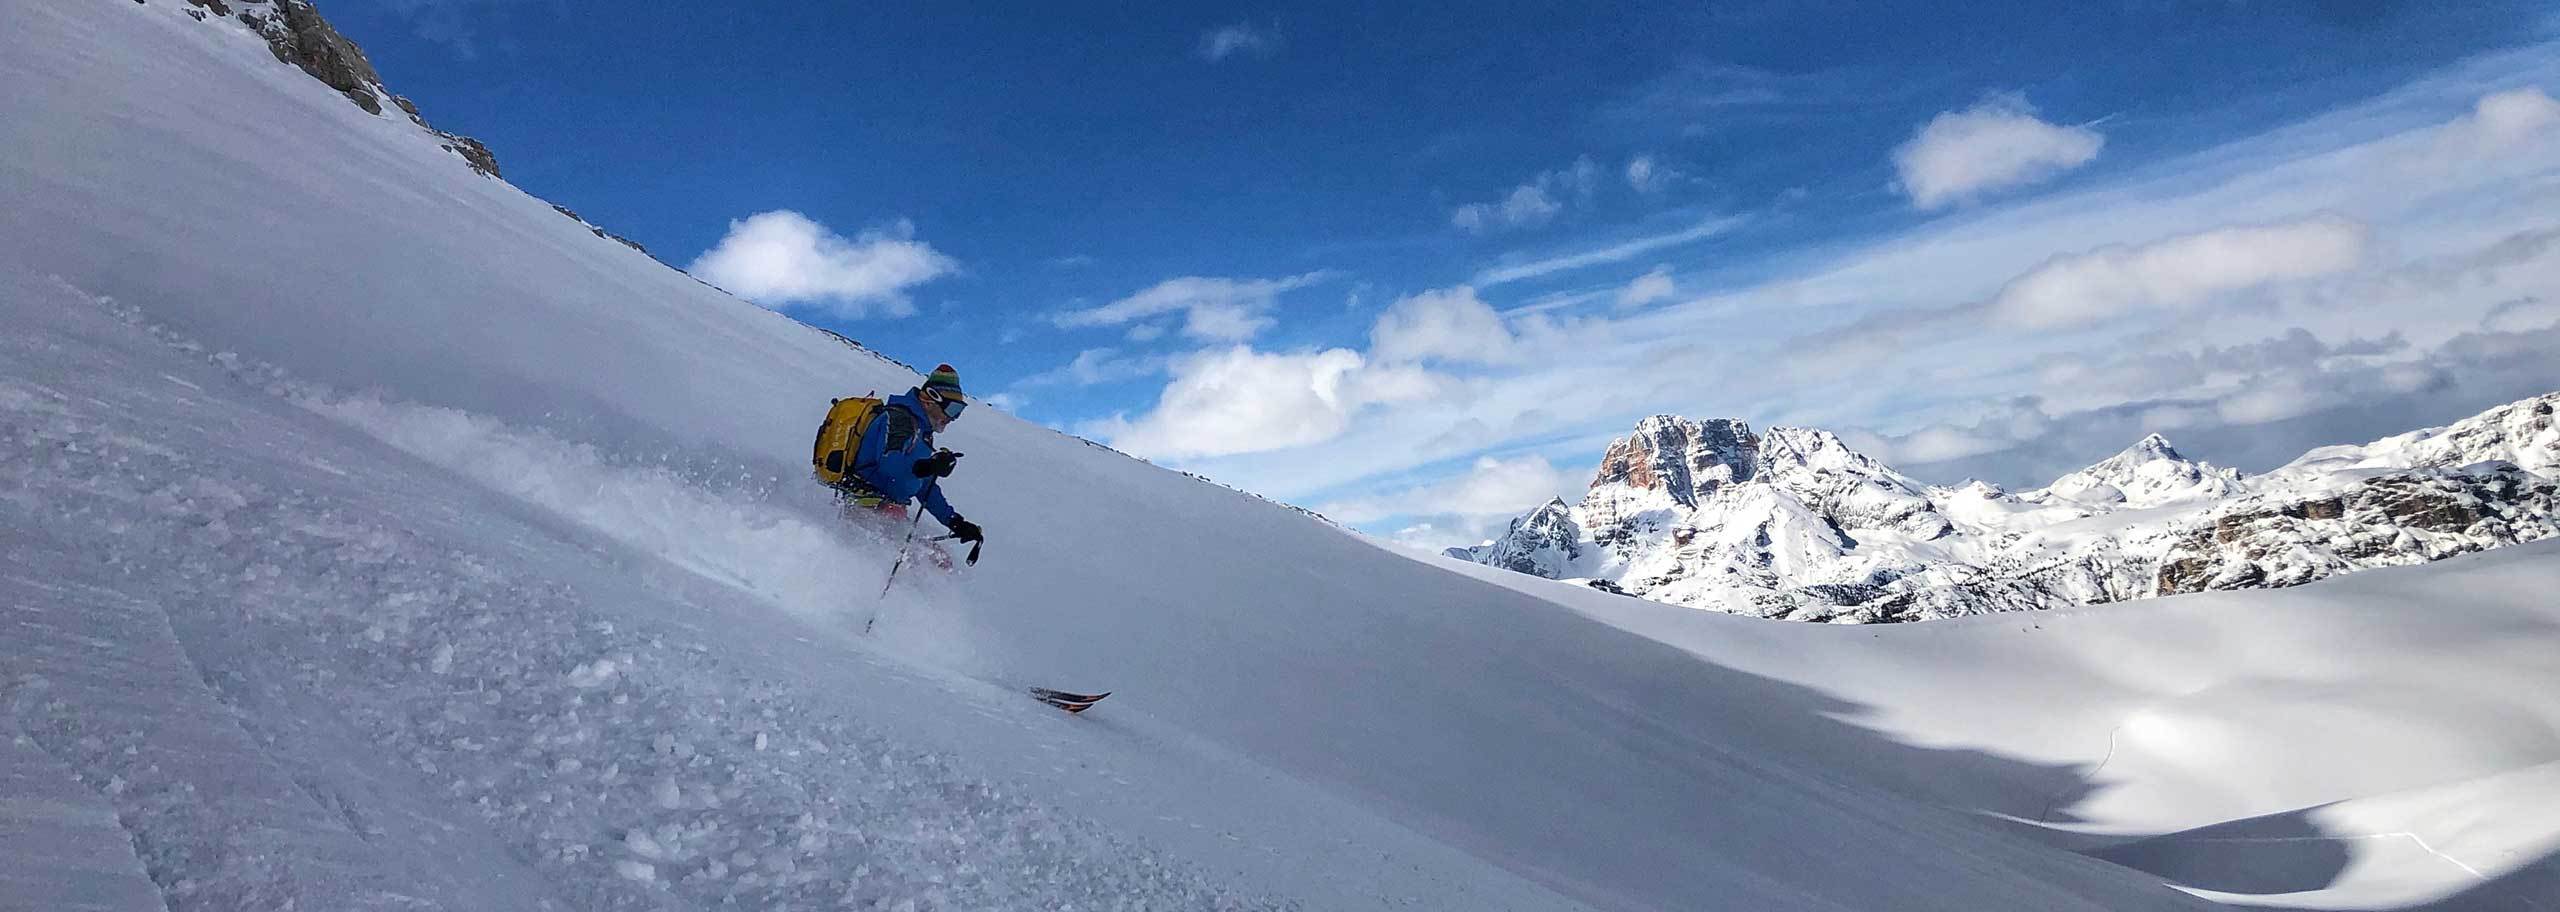 Off-piste Skiing in Auronzo di Cadore, Guided Freeride Skiing Trips